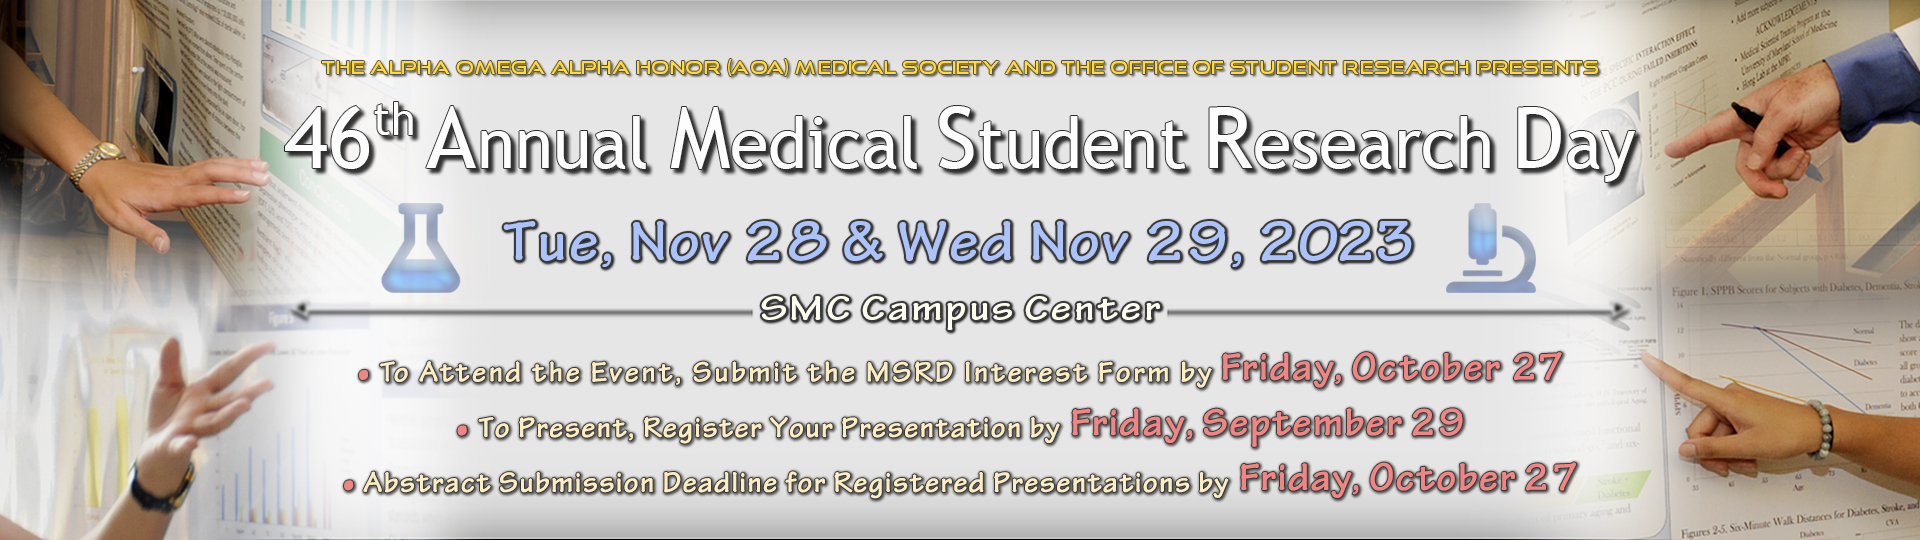 Medical Student Research Day